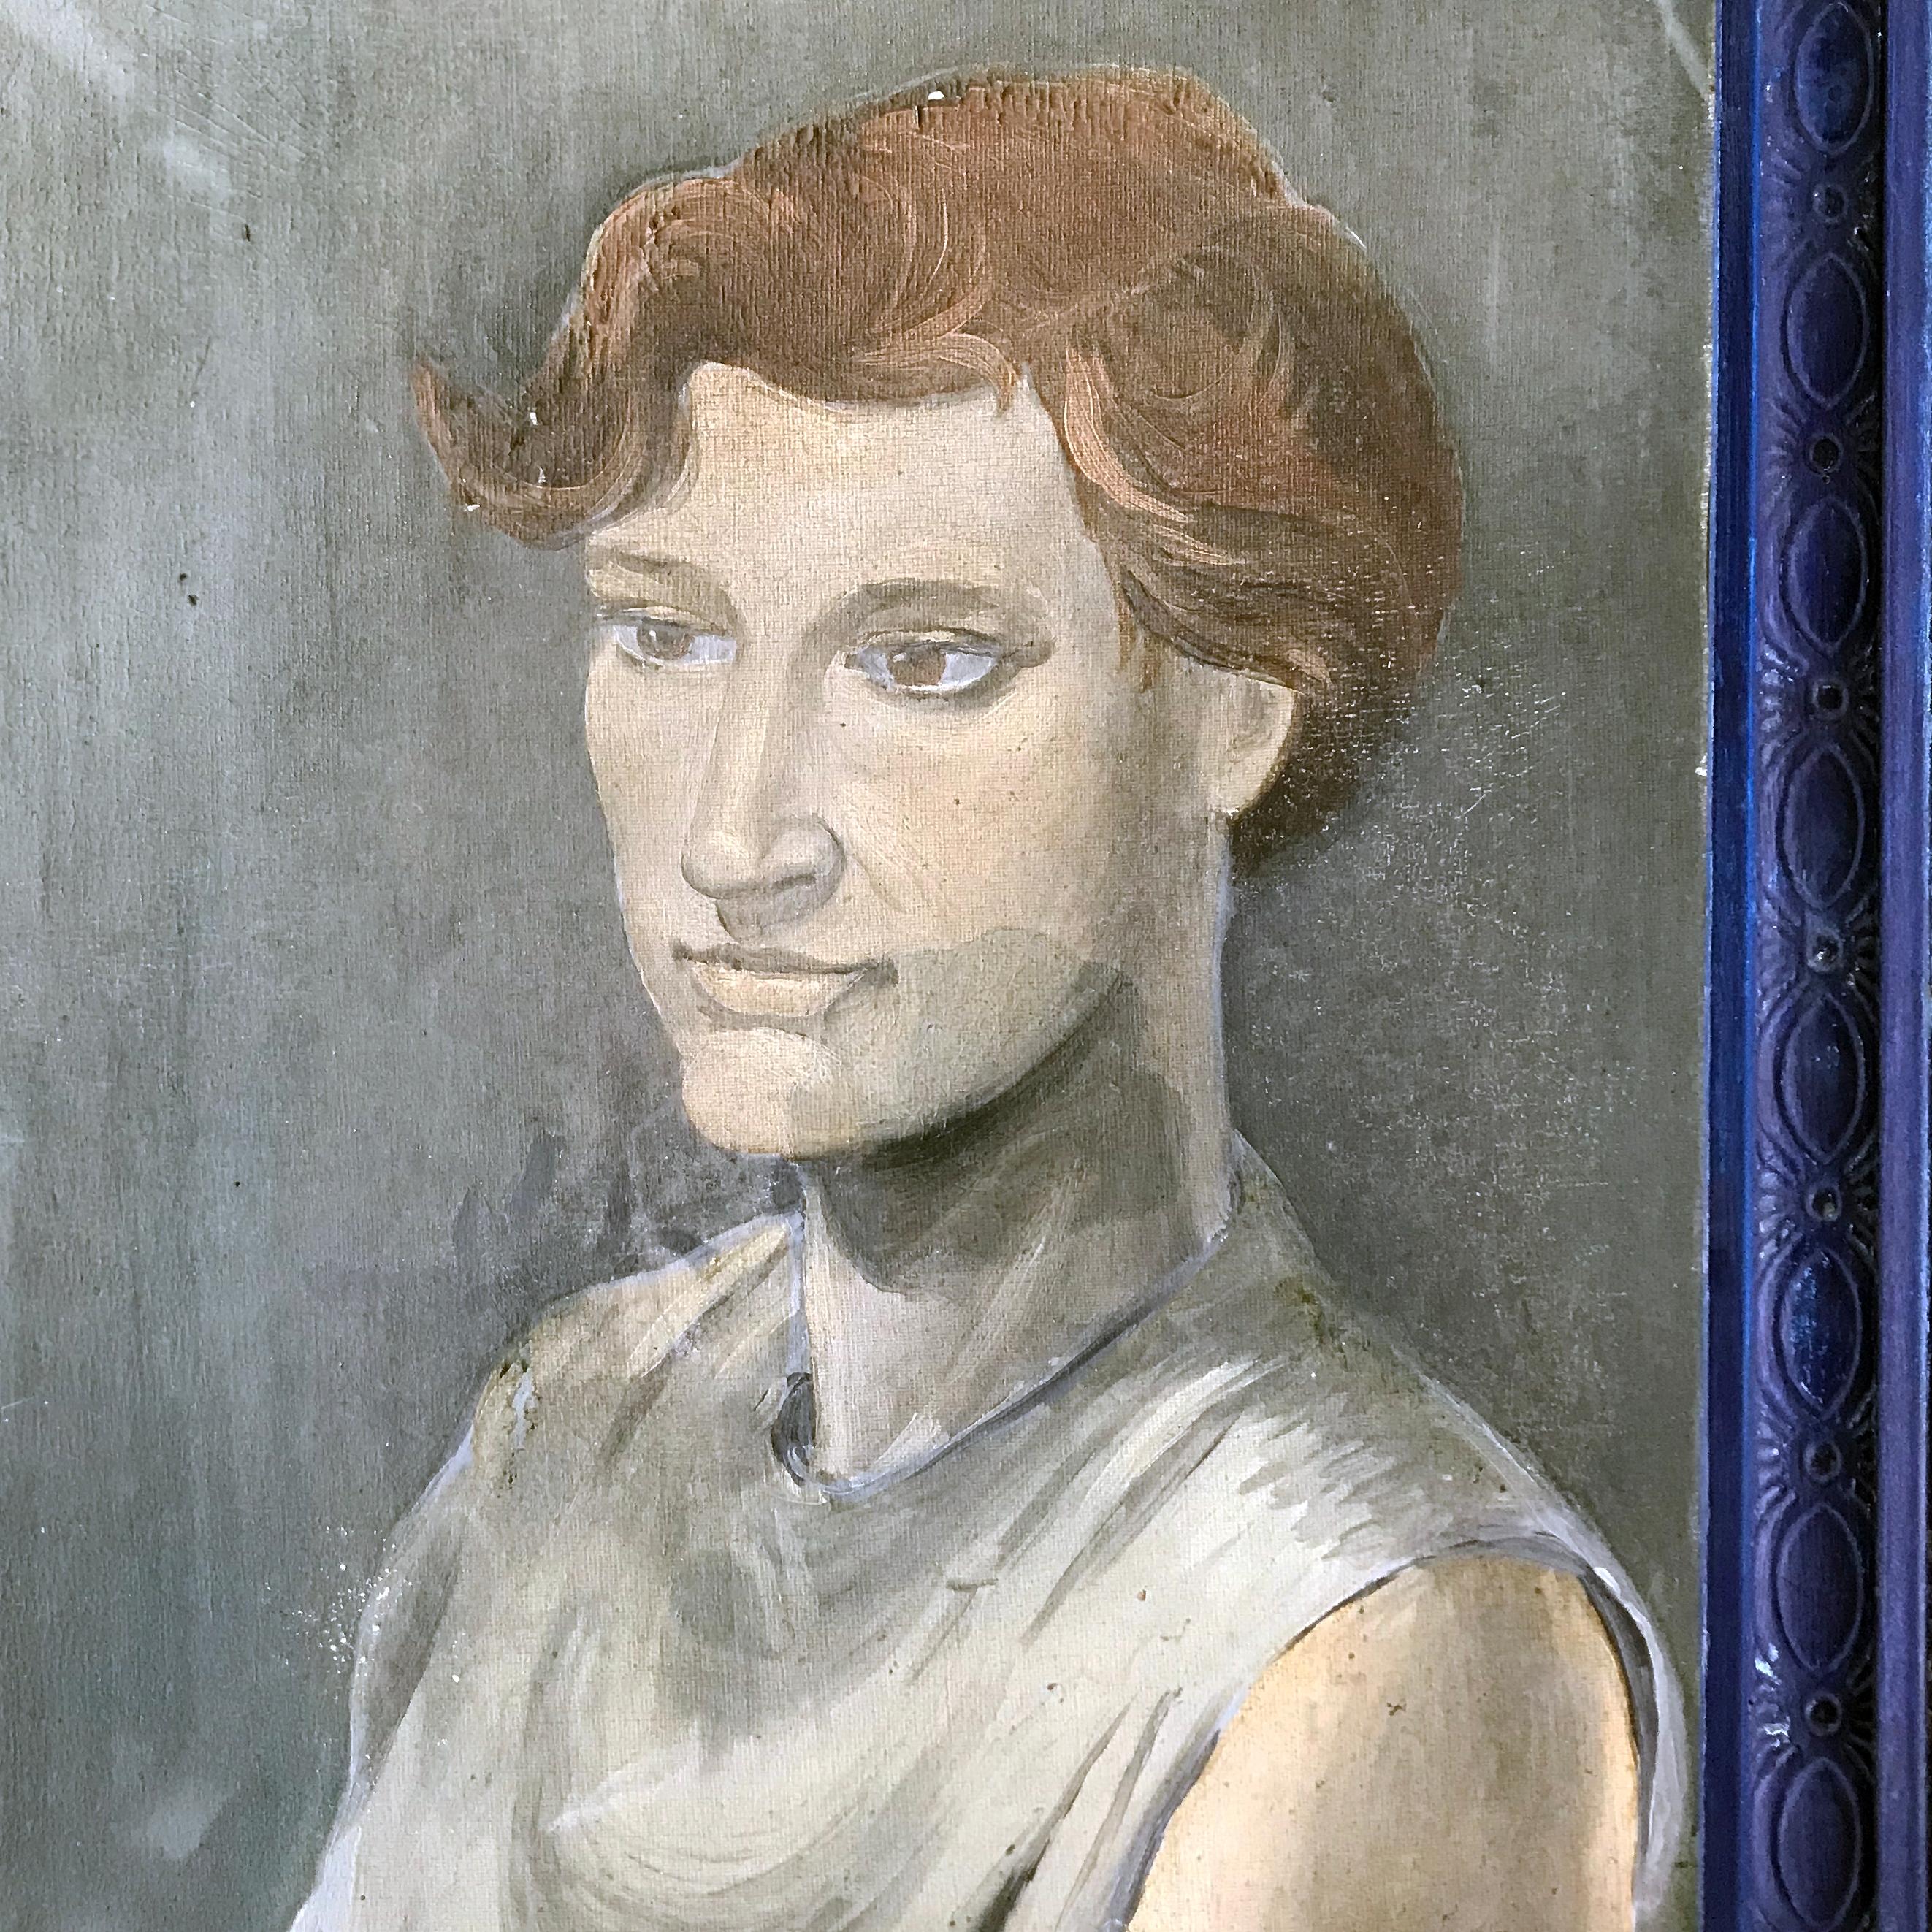 A wonderful 1930s portrait of a striking young man, oil on artist's board. Sensitively observed in a beautifully muted palette of greens, blues and greys complimented by the auburn haired sitter, possibly a ballet dancer at rest.  A very evocative